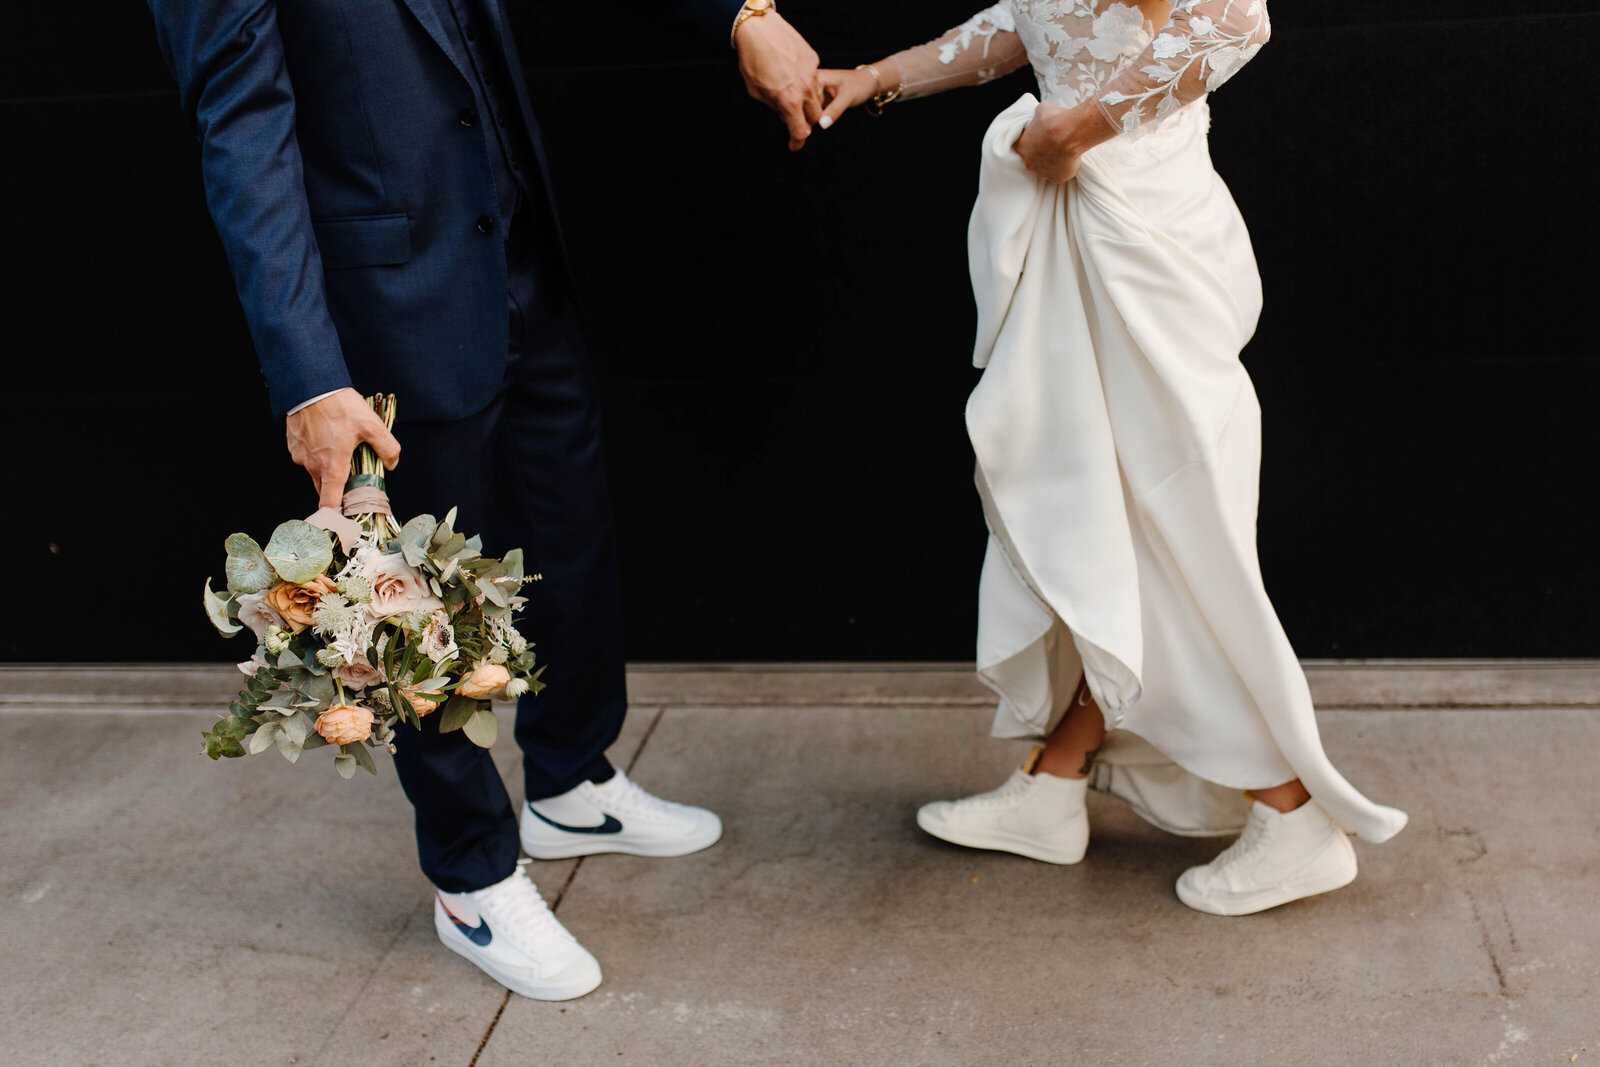 bride and groom with sneakers on holding hands